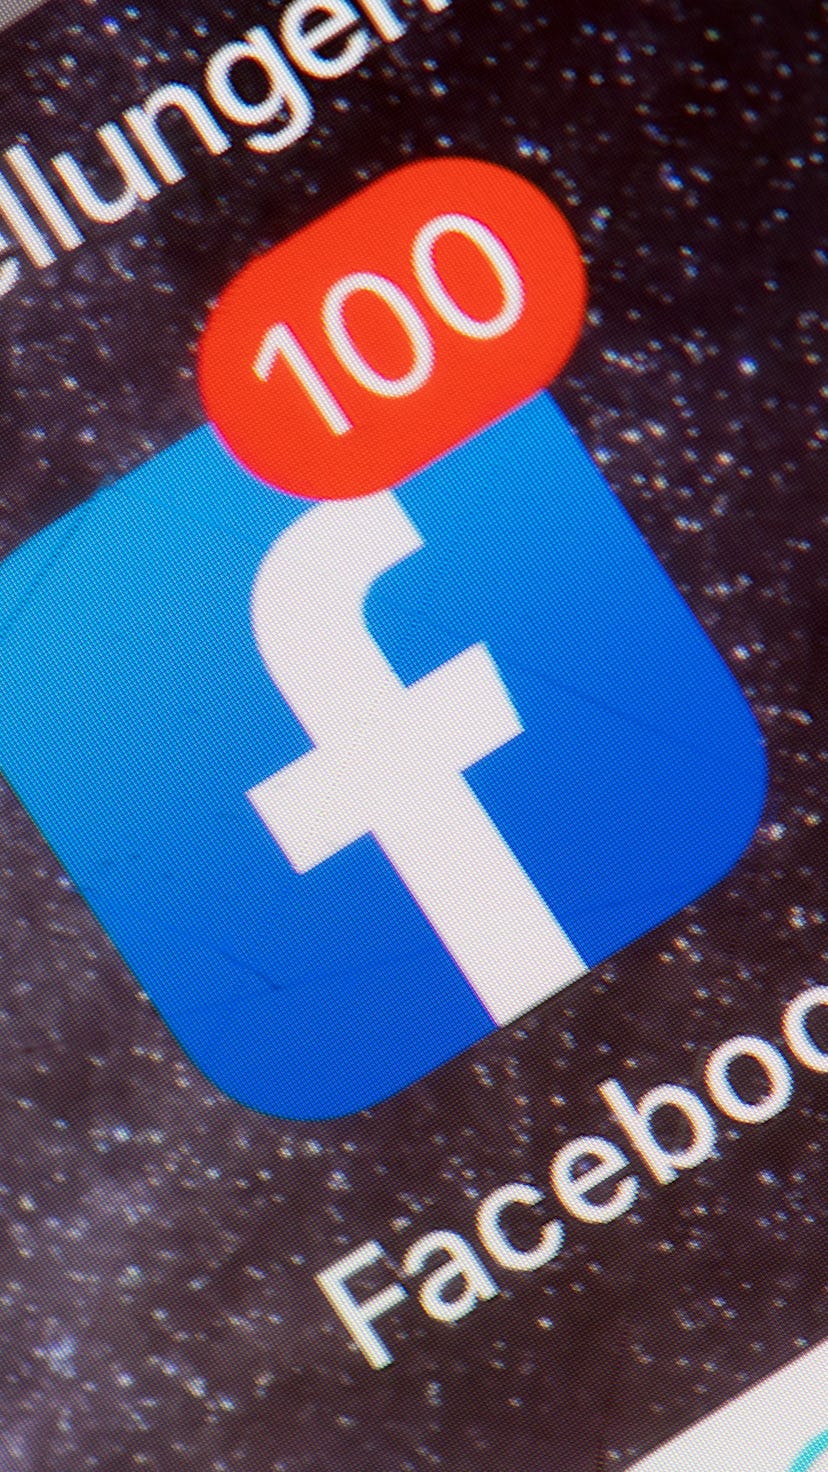 15 September 2019, Berlin: The Facebook logo on the display of a smartphone indicates the number of ...